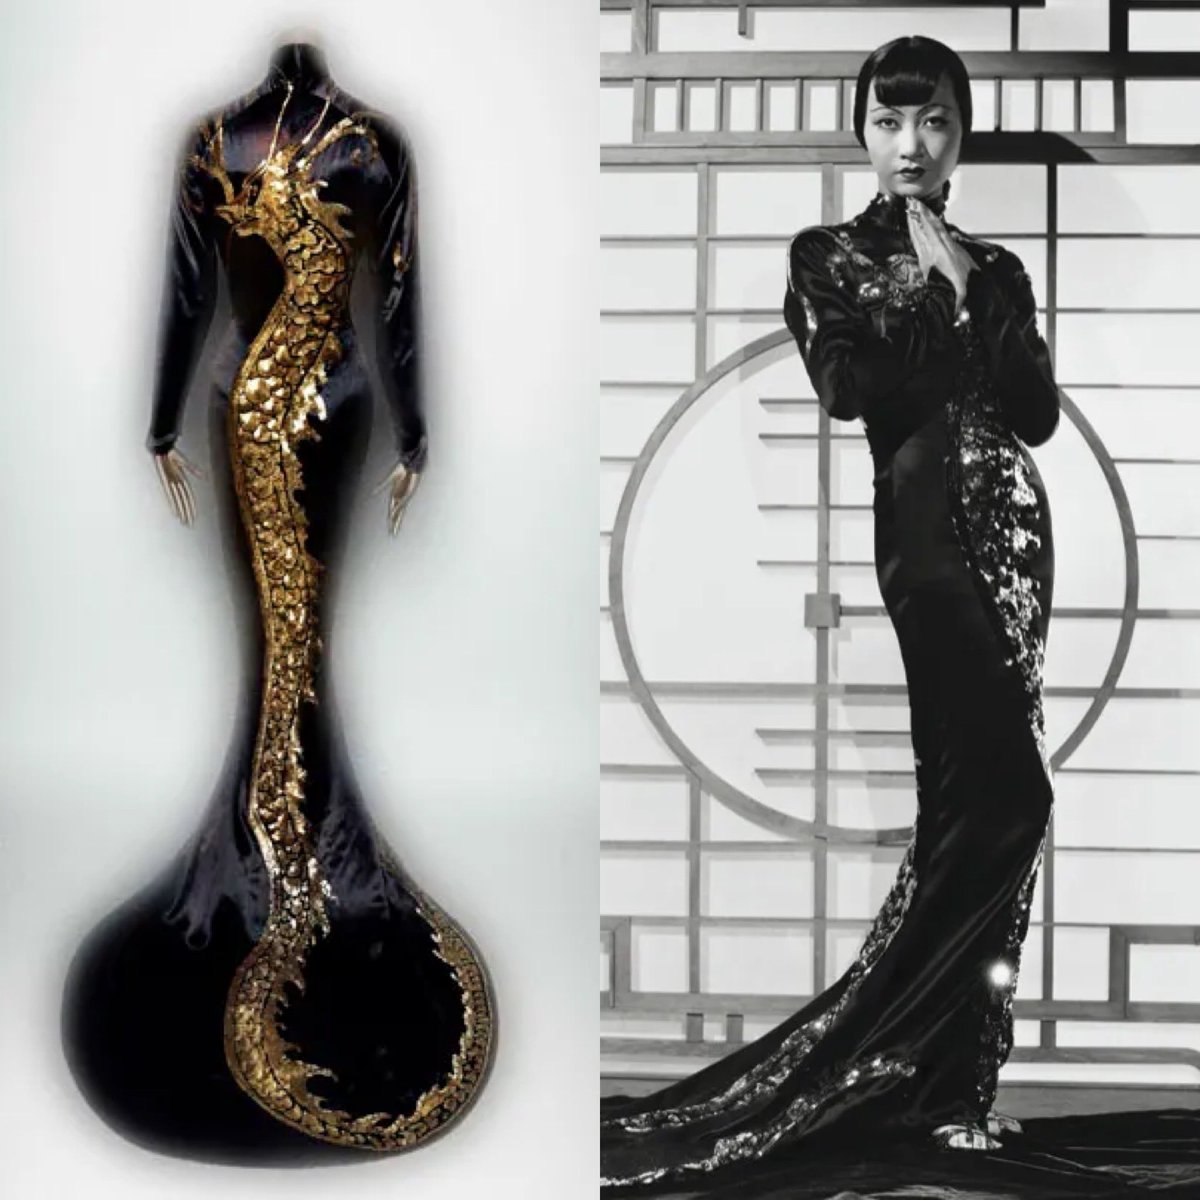 The wonderful #AnnaMayWong was born on this day in 1905. #TravisBanton designed this golden dragon dress in 1934 for the movie Limehouse Blues @metmuseum #fashionhistory